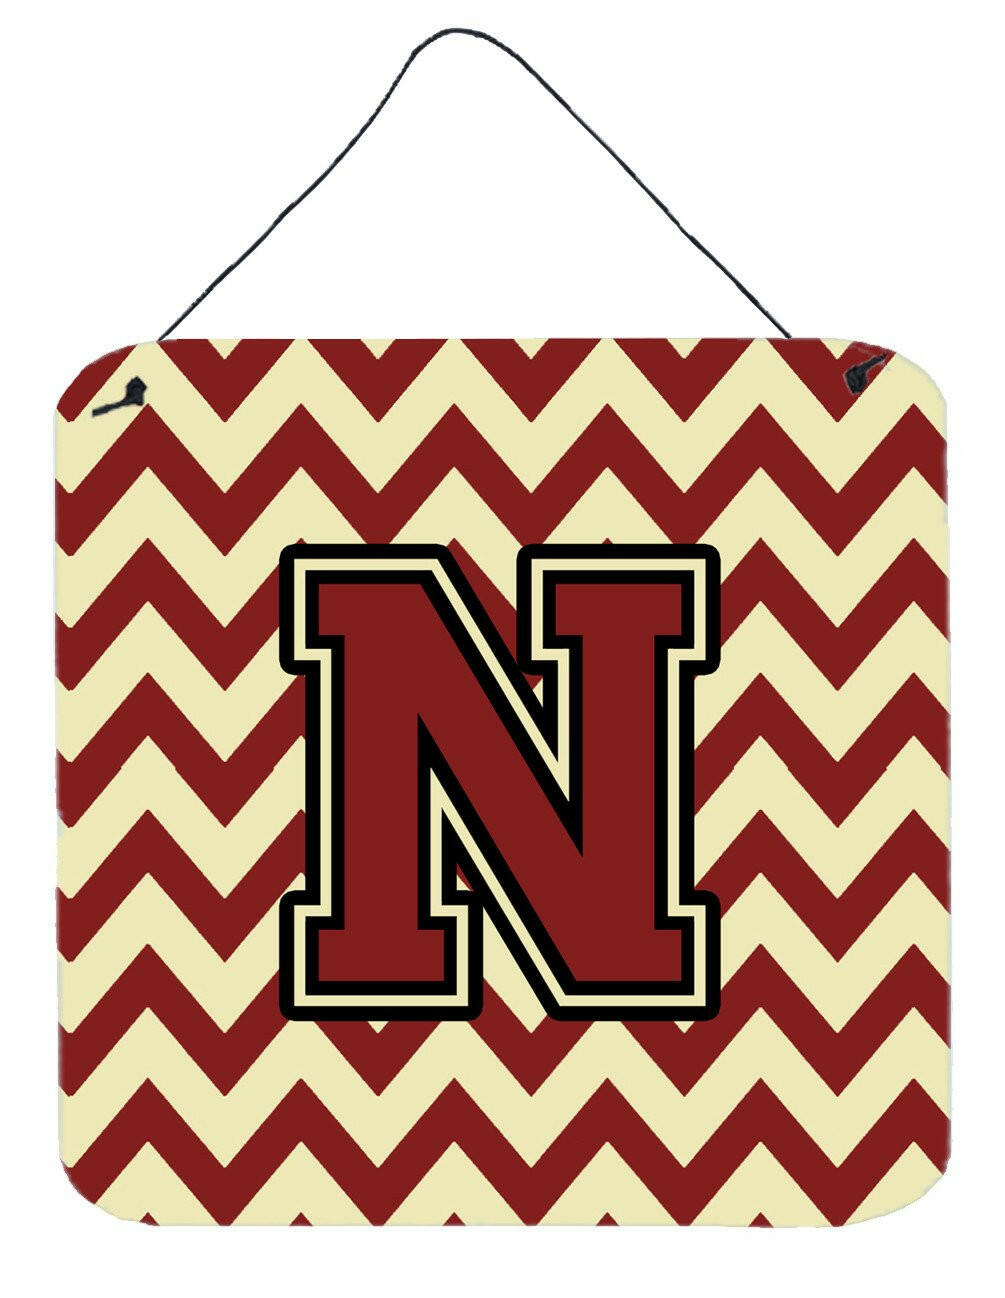 Letter N Chevron Maroon and Gold Wall or Door Hanging Prints CJ1061-NDS66 by Caroline's Treasures